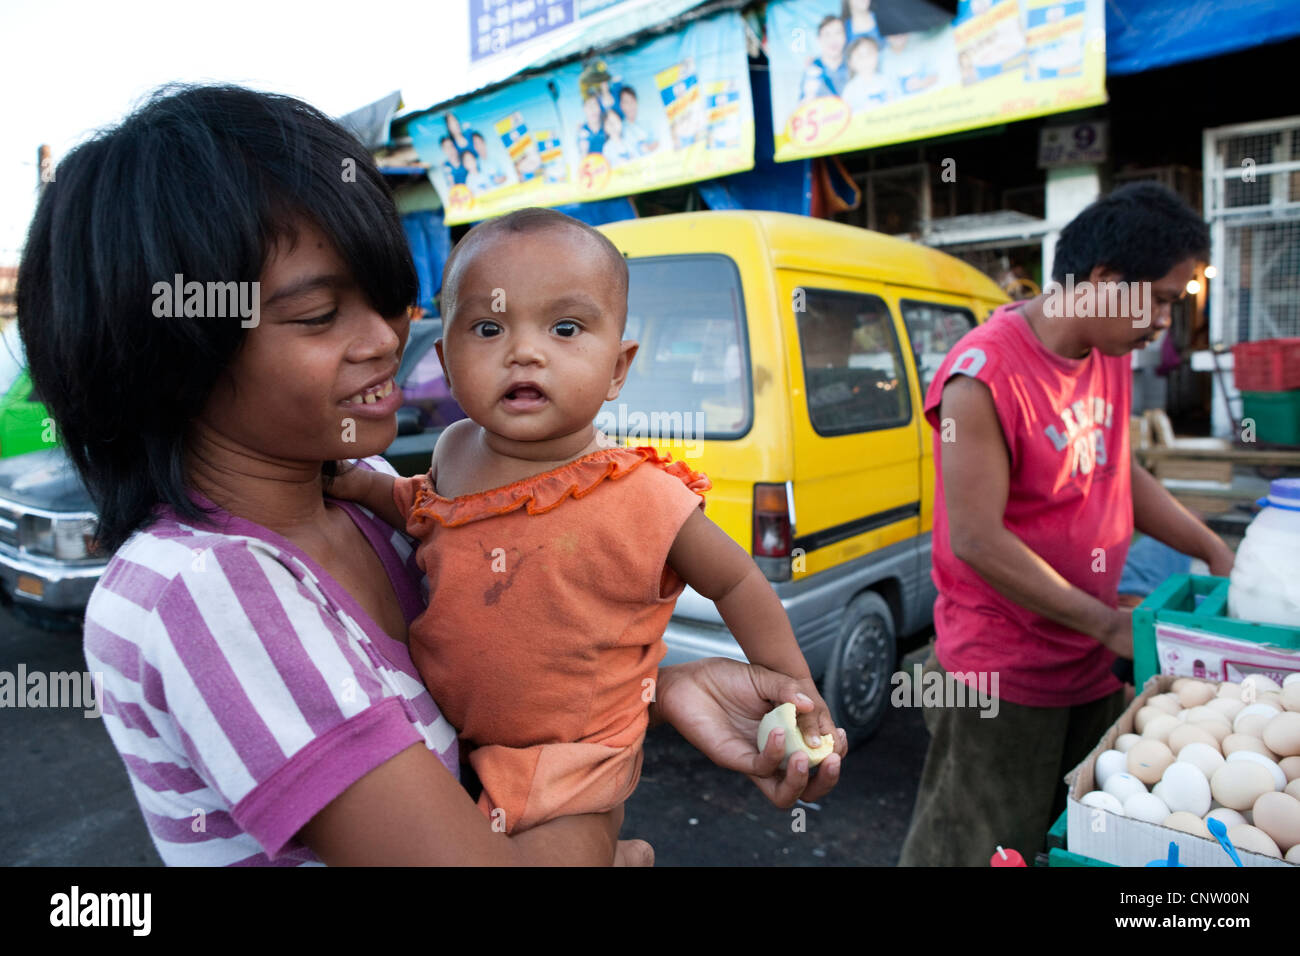 Woman with her baby, she is buying Balut, a fertilized duck embryo from a roadside vendor. Carbon Market, Cebu City, Philippines Stock Photo